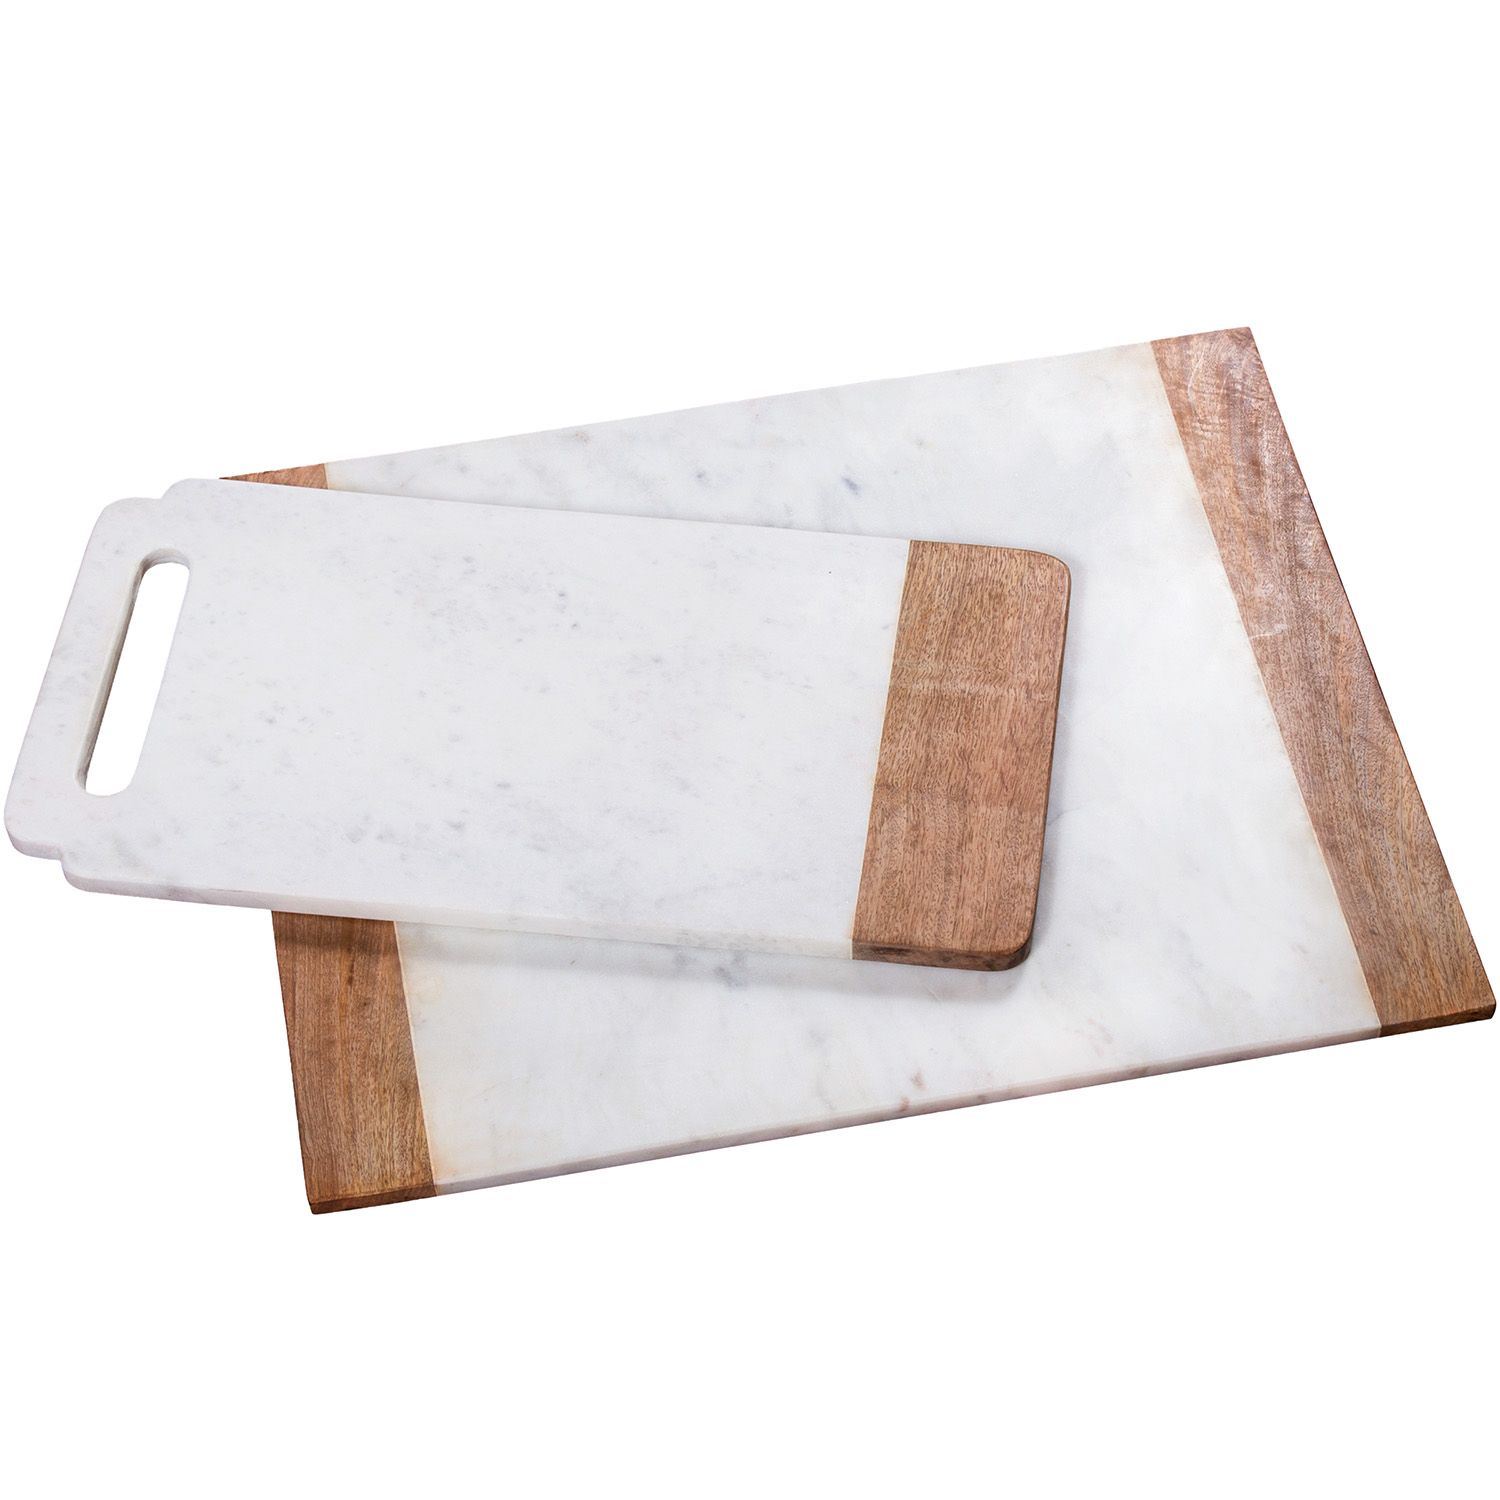 Marble and Mango Wood Serving Boards, Set of 2